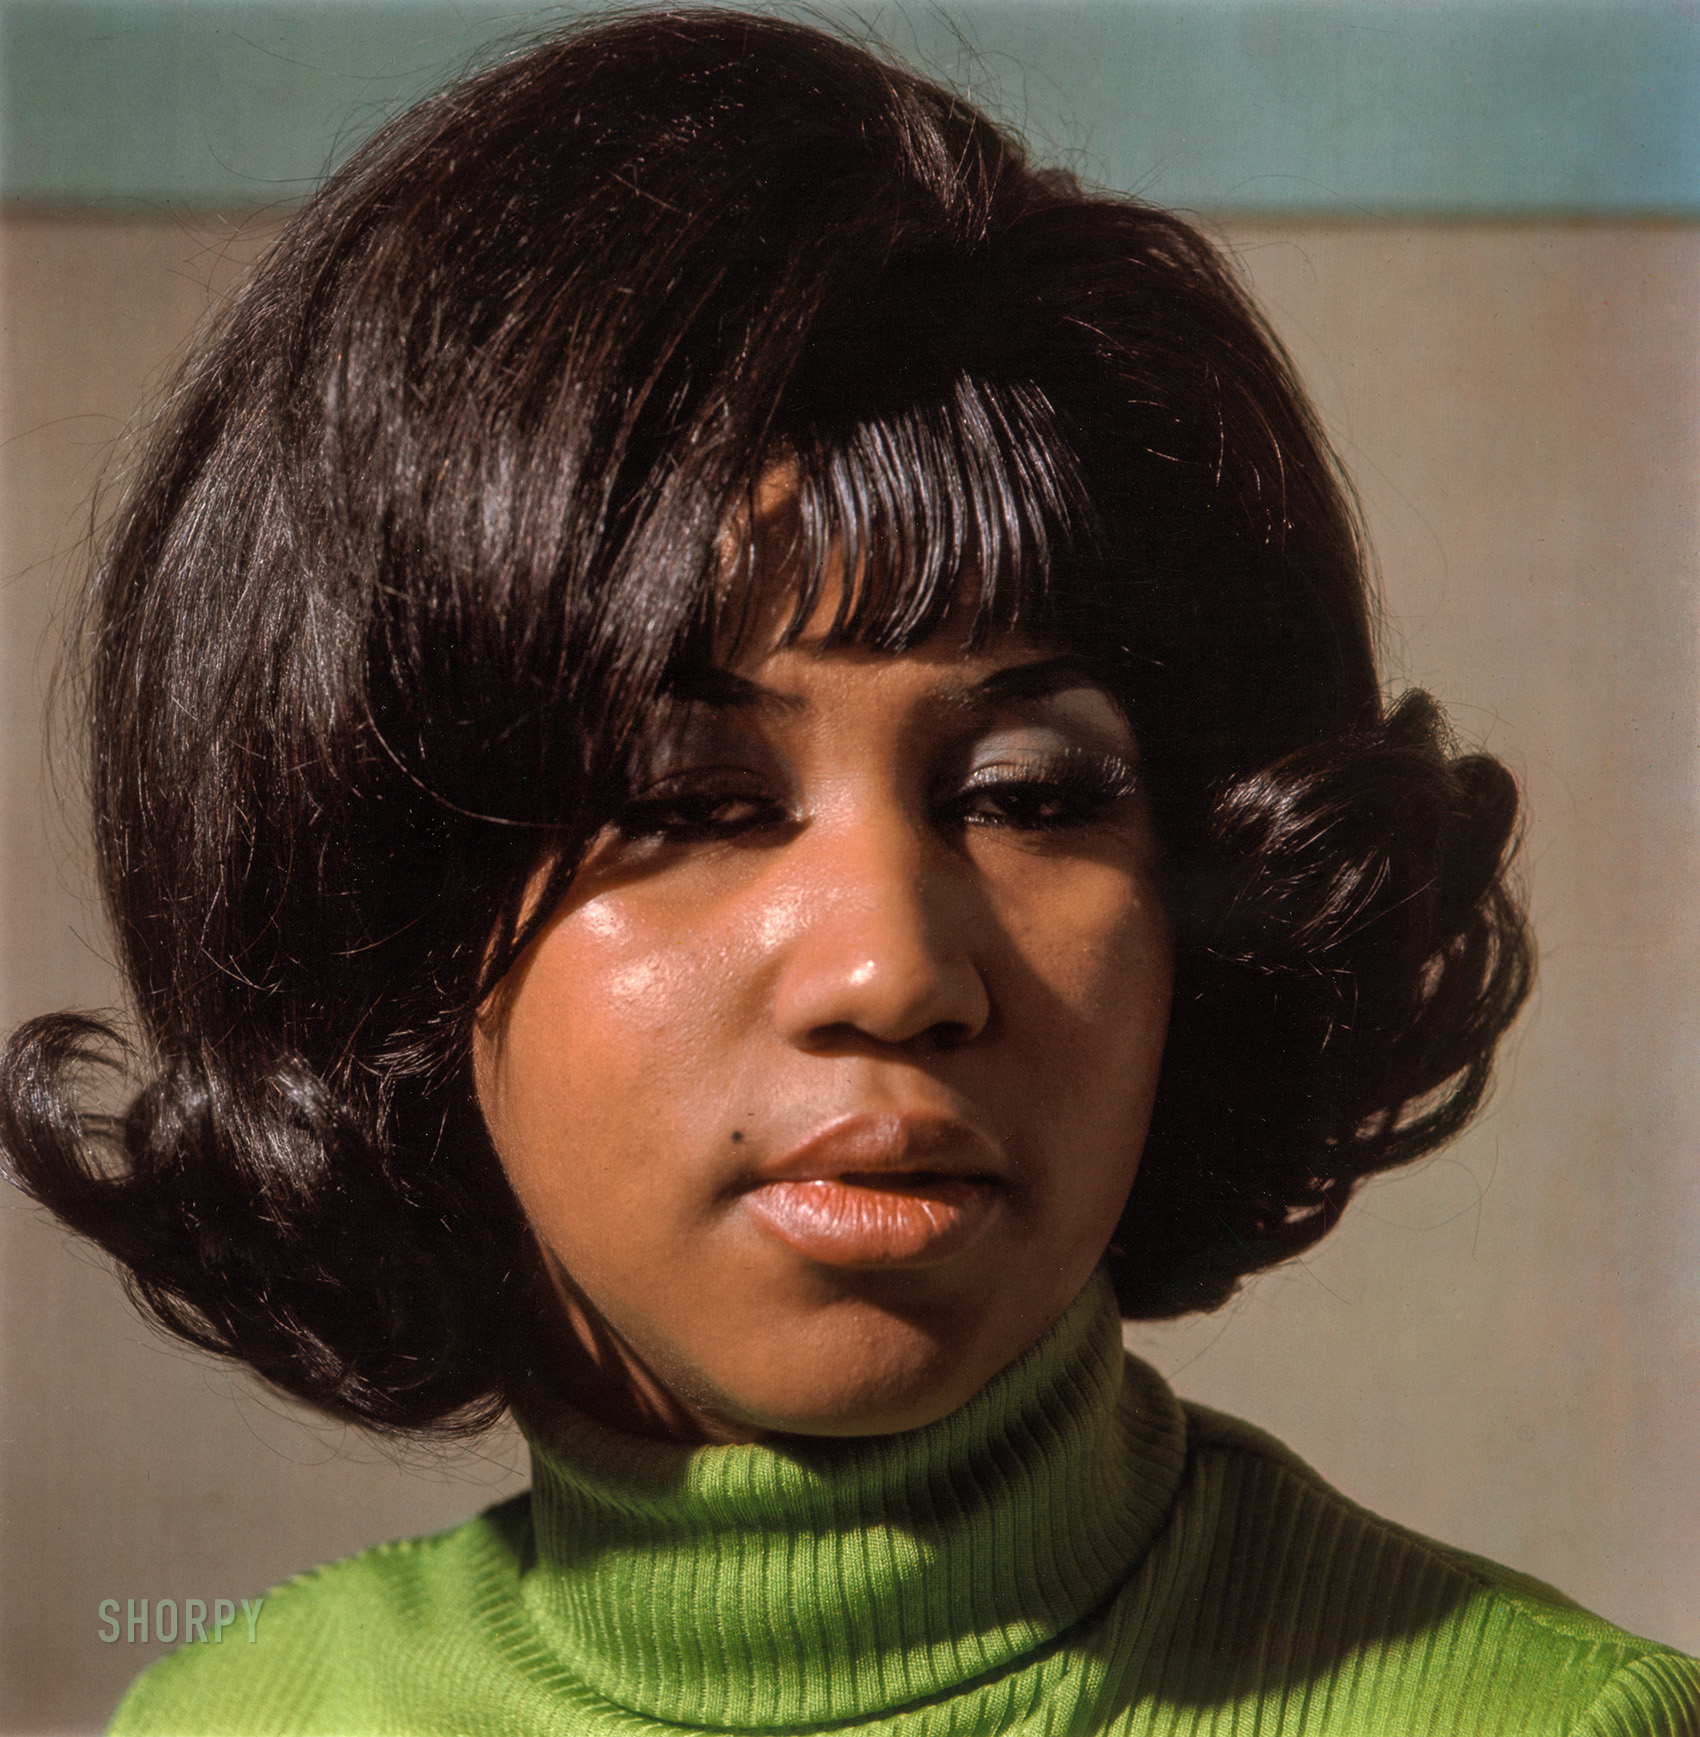 &nbsp; &nbsp; &nbsp; &nbsp; Aretha Franklin, universally acclaimed as the “Queen of Soul” and one of America’s greatest singers in any style, died on Thursday at her home in Detroit. She was 76.
— New York Times
"Aretha Franklin, Jazz & Blues portfolio, 1968." Dye transfer print by Lee Friedlander. Library of Congress Prints & Photographs Division. View full size.